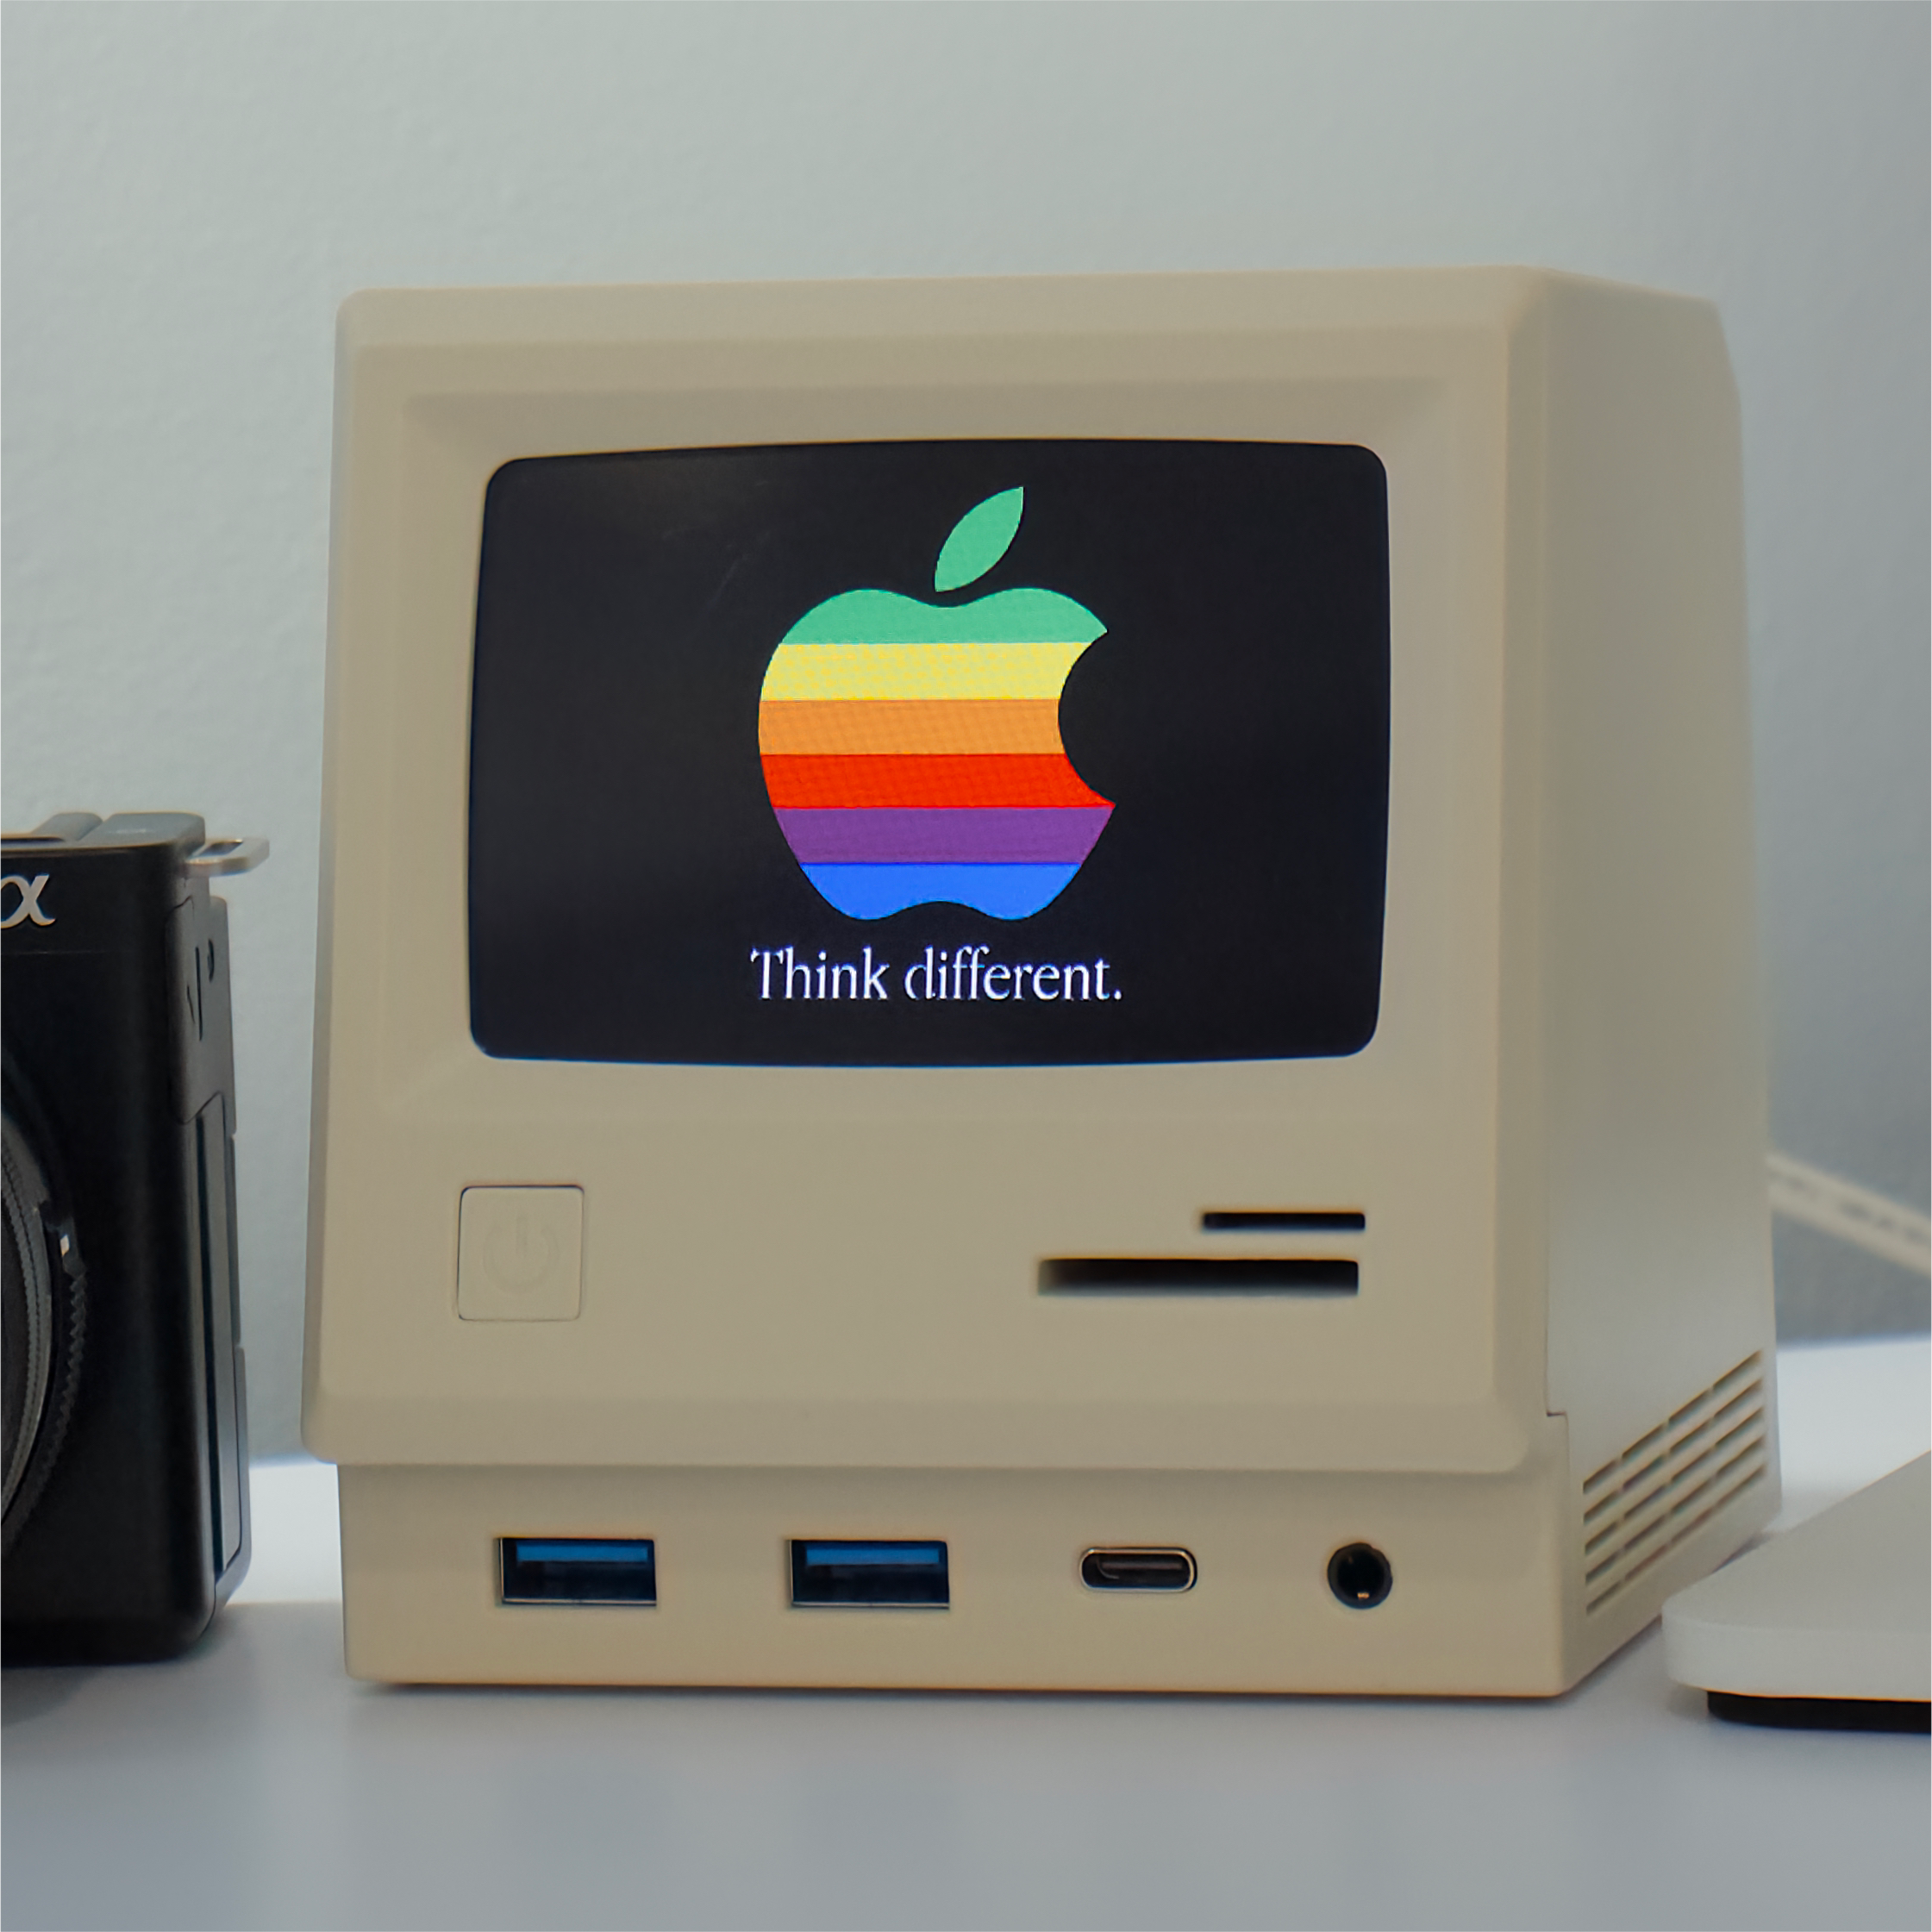 This retro 14-in-one docking system takes you back to the future